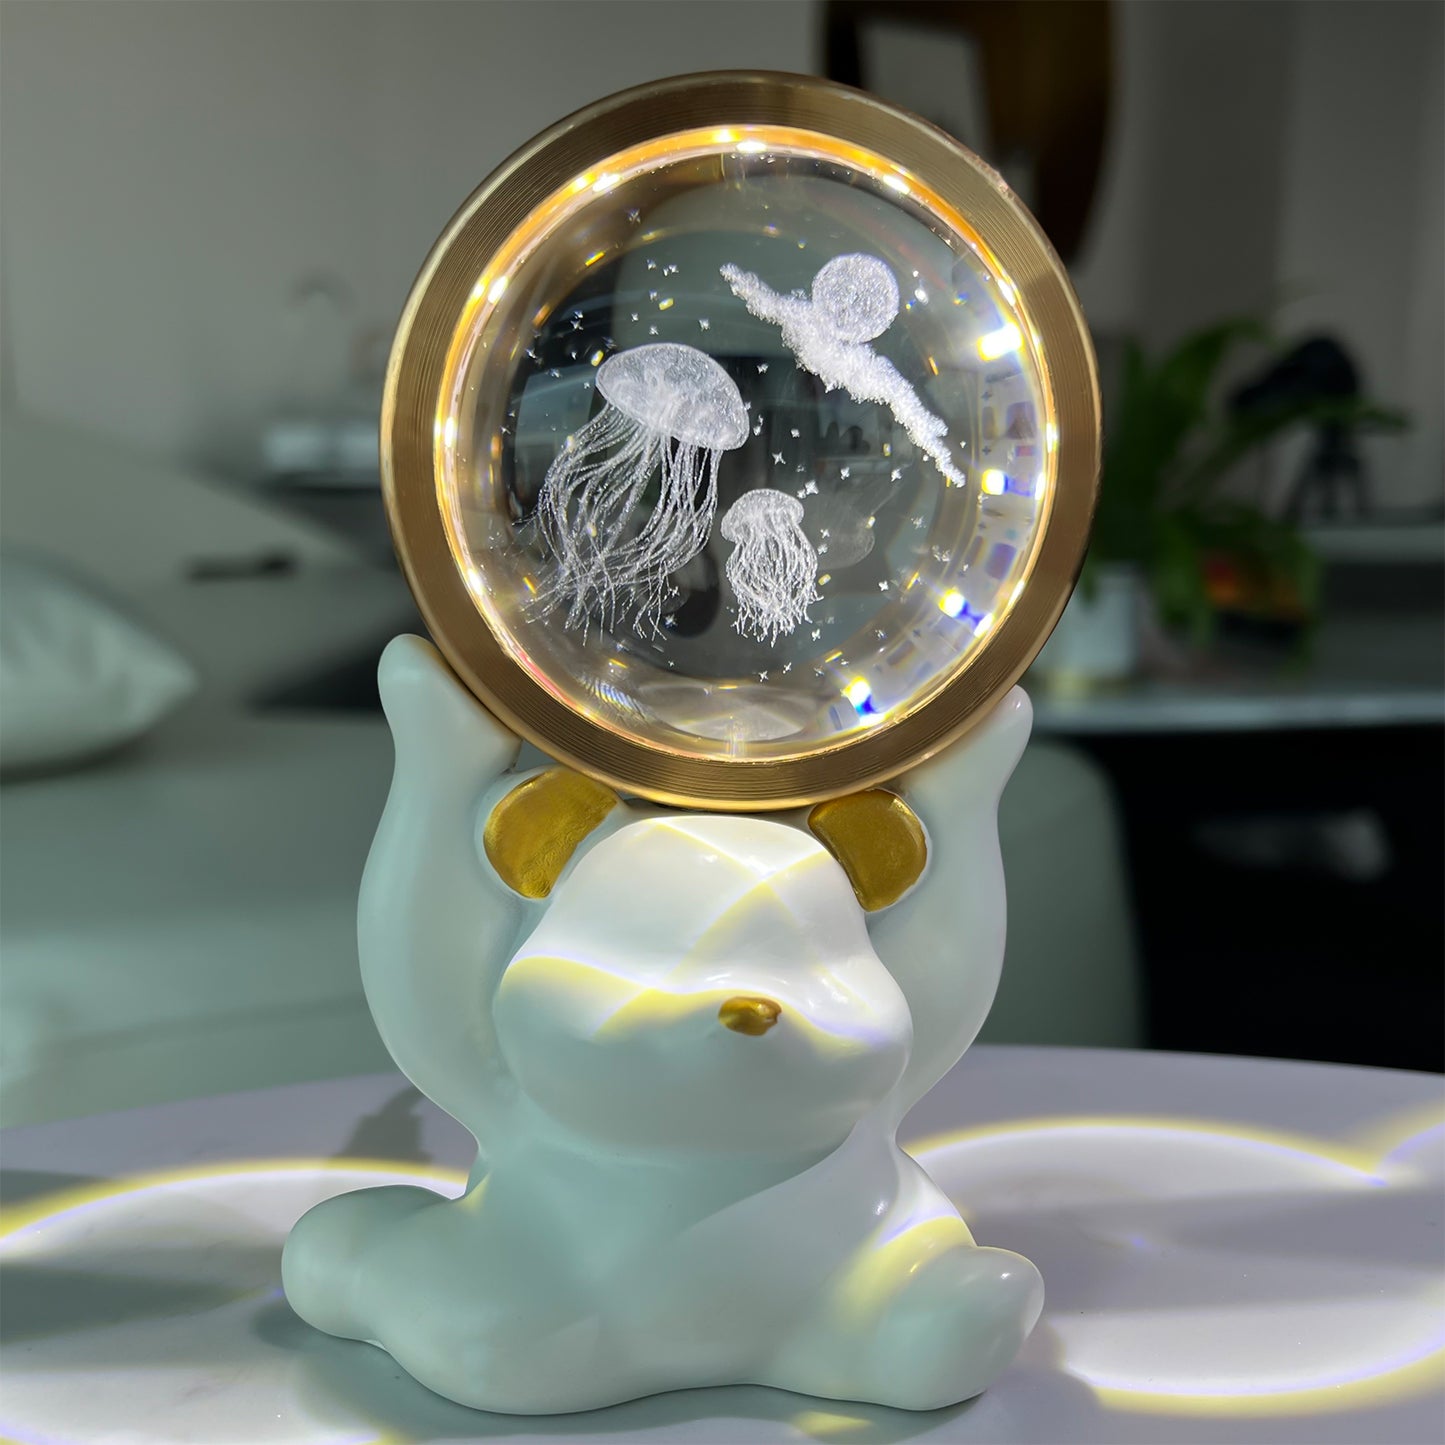 3D Jellyfish Crystal Ball,Figurine Night Light with LED Light, Bear Holding Decoration,5.1in Tall,Rotating Crystal Ball,Fancy Gift,Room Decor,Birthday,Valentine's Day, Mother's Day